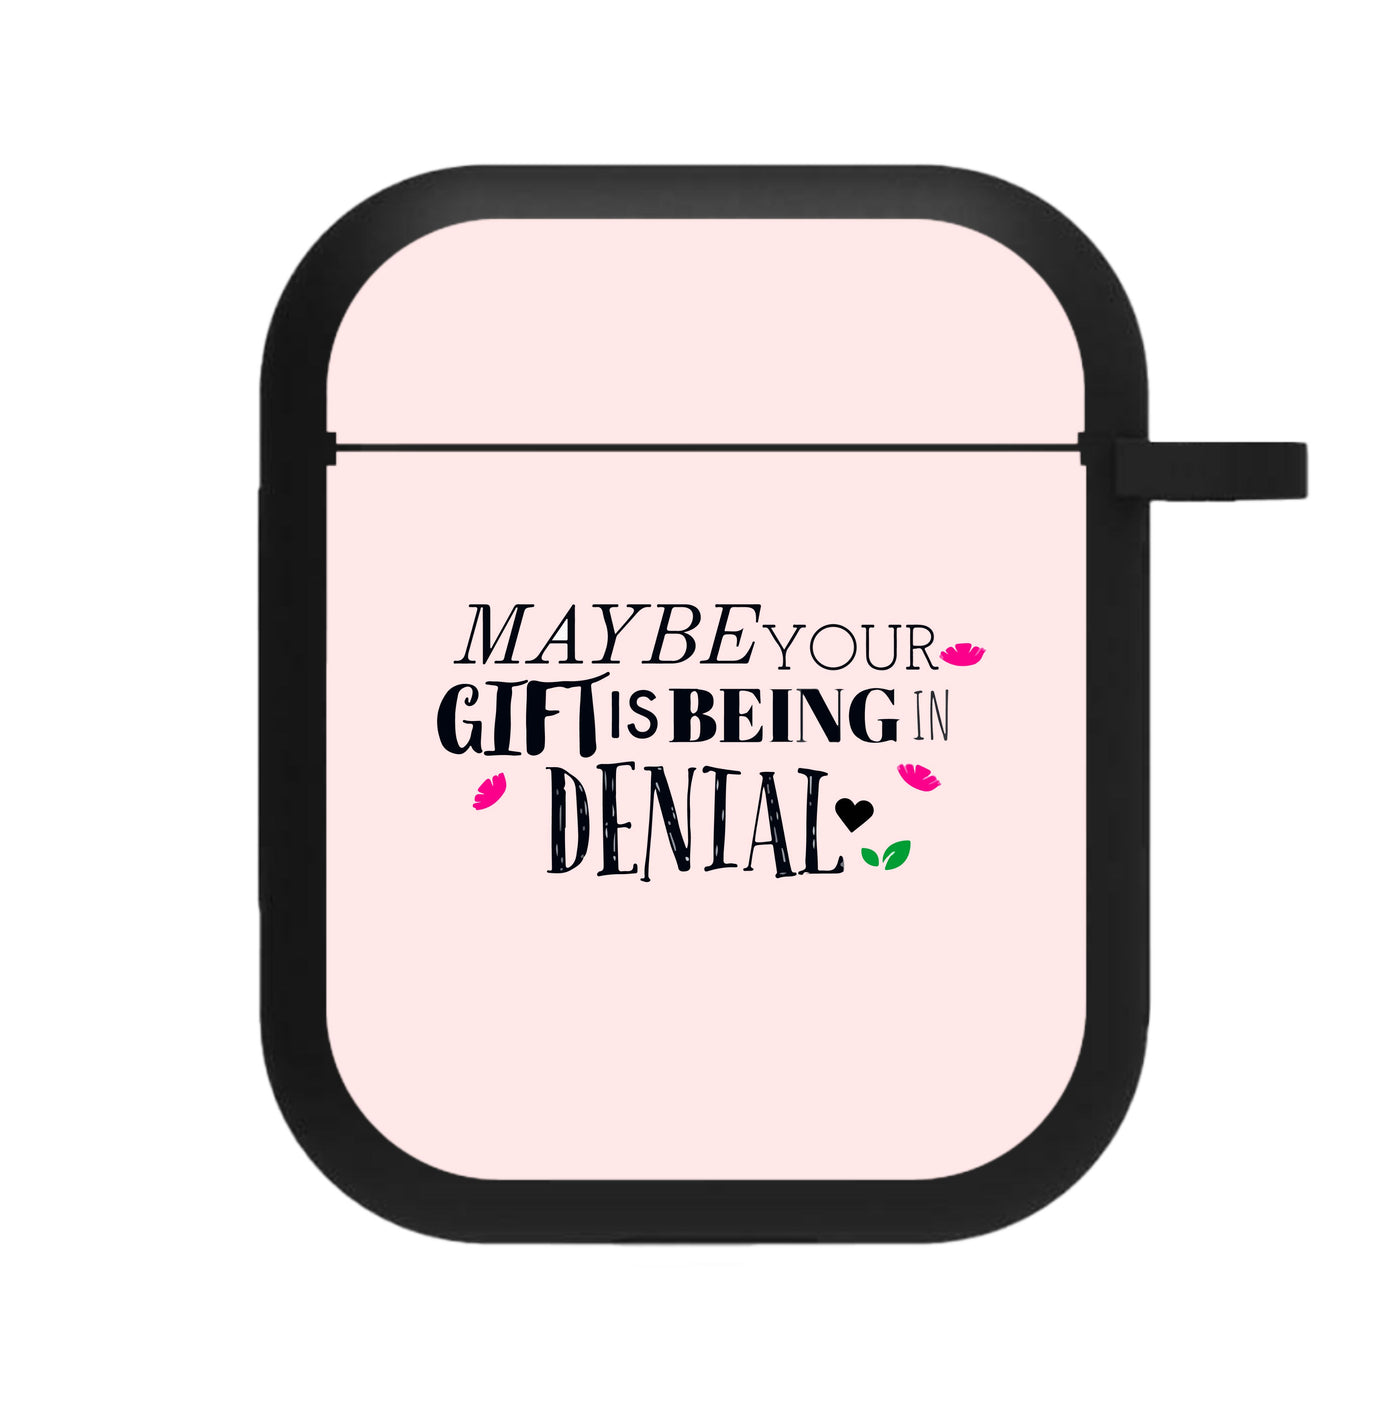 Maybe Your Gift Is Being In Denial - Encanto AirPods Case